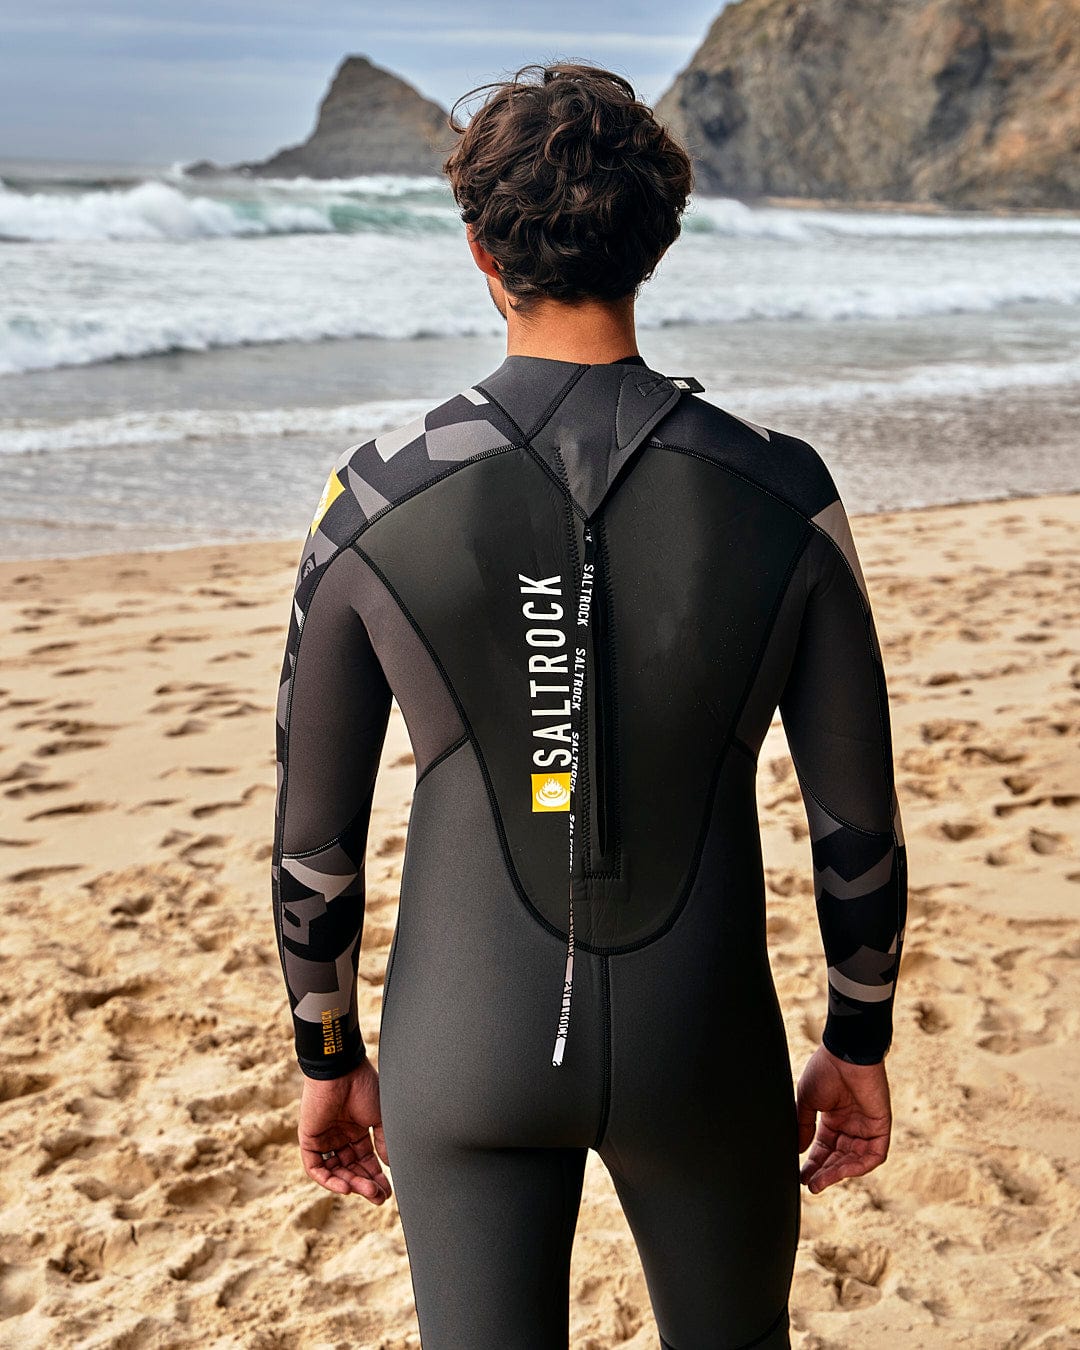 Back view of a man wearing a Saltrock Geo Camo - Mens 3/2 Full Wetsuit - Black on the beach.